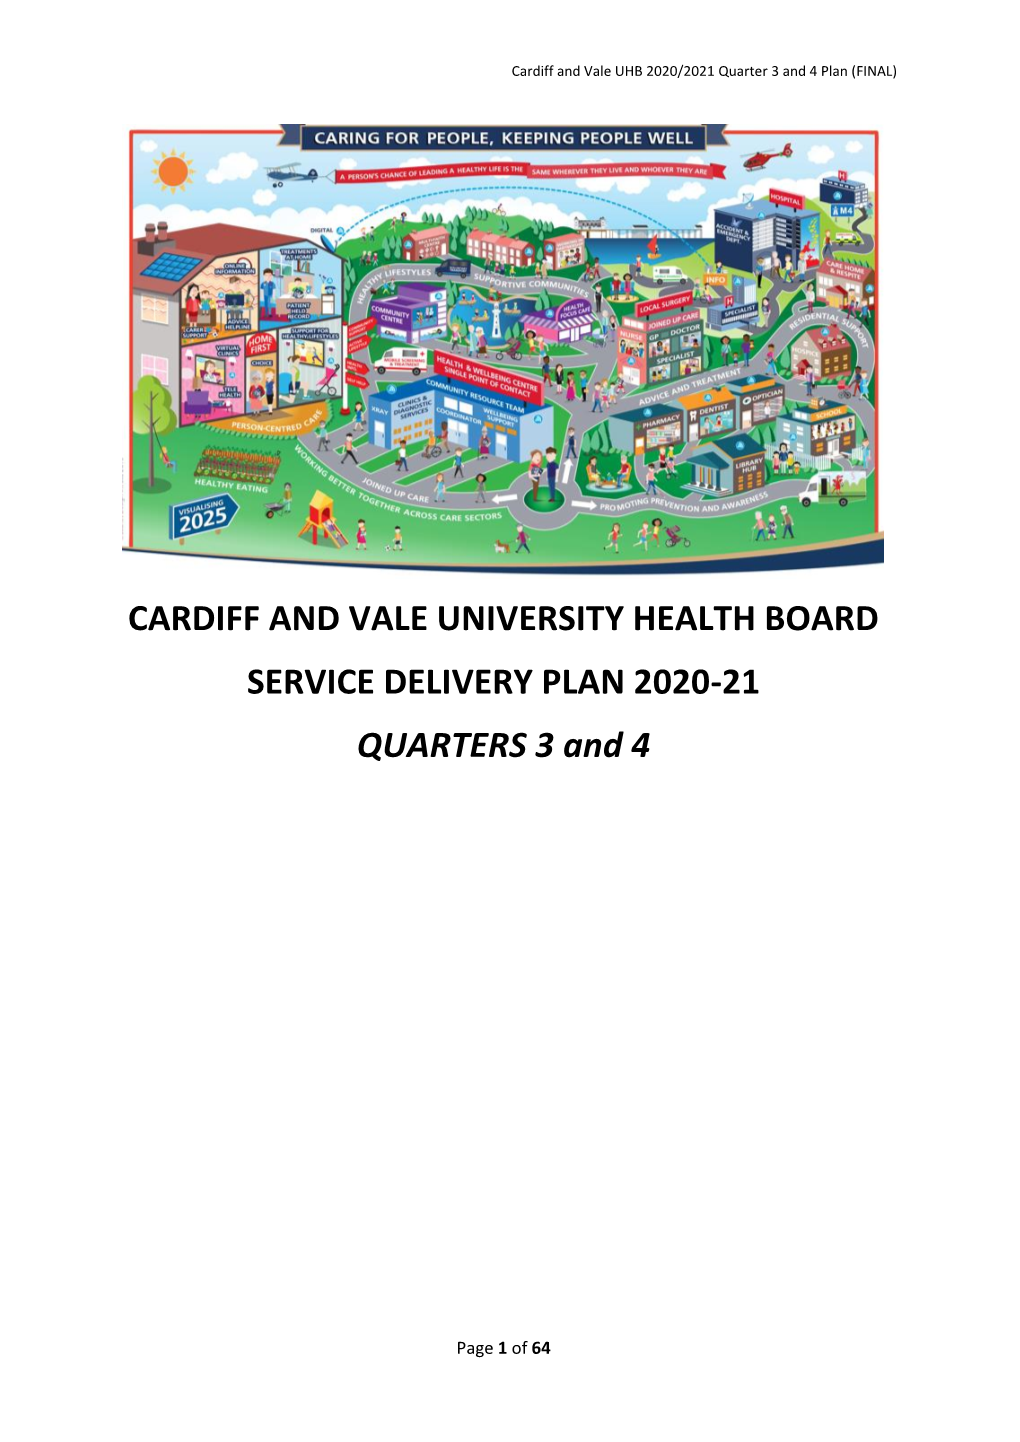 CARDIFF and VALE UNIVERSITY HEALTH BOARD SERVICE DELIVERY PLAN 2020-21 QUARTERS 3 and 4